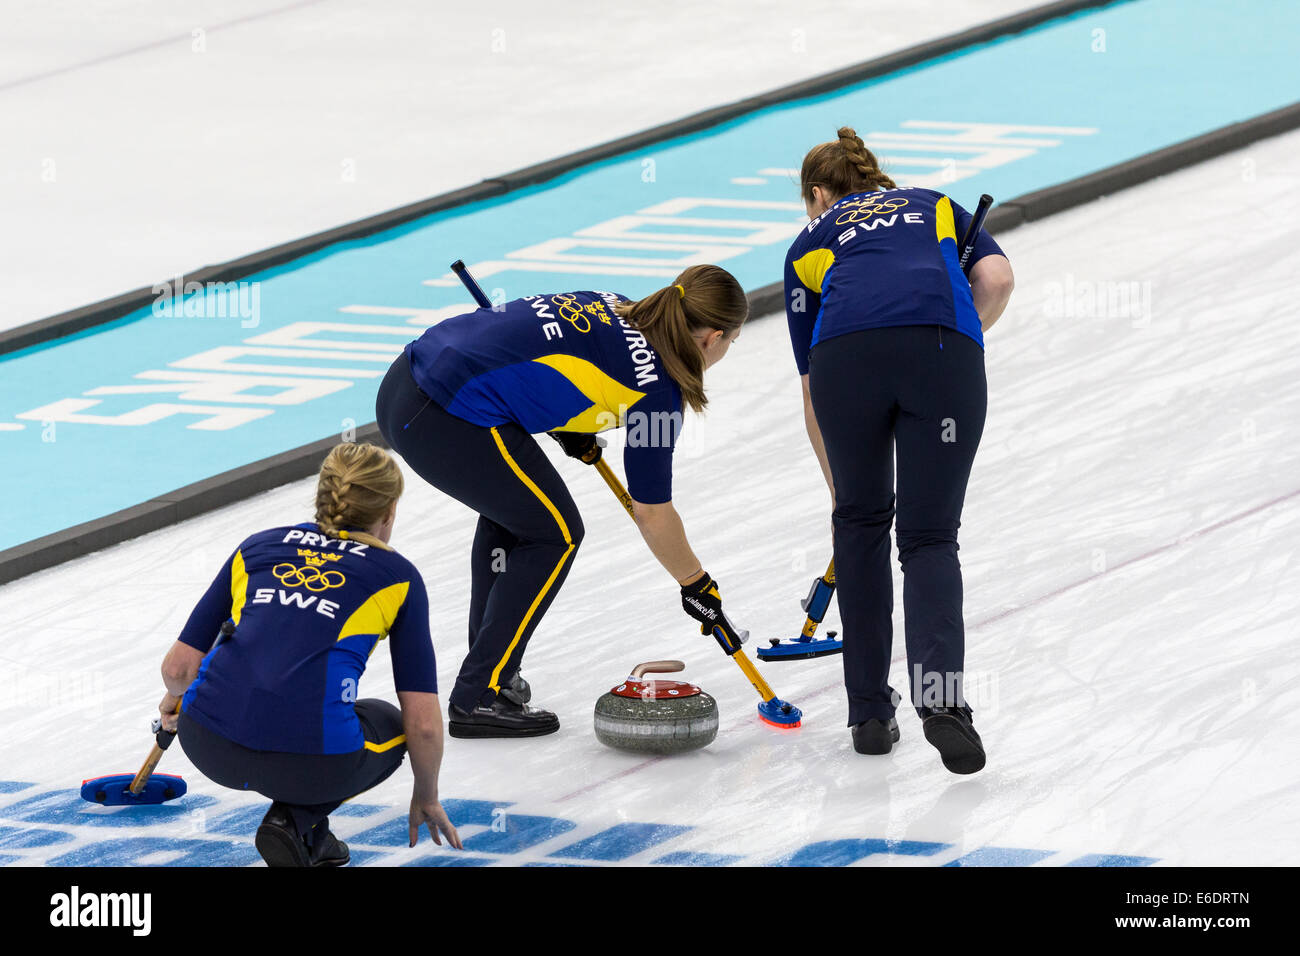 Maria Prytz (L) plays a stone with Maria Wennerstroem (C) and Christina Bertrup sweeping  of Team Sweden during  Women's curling Stock Photo